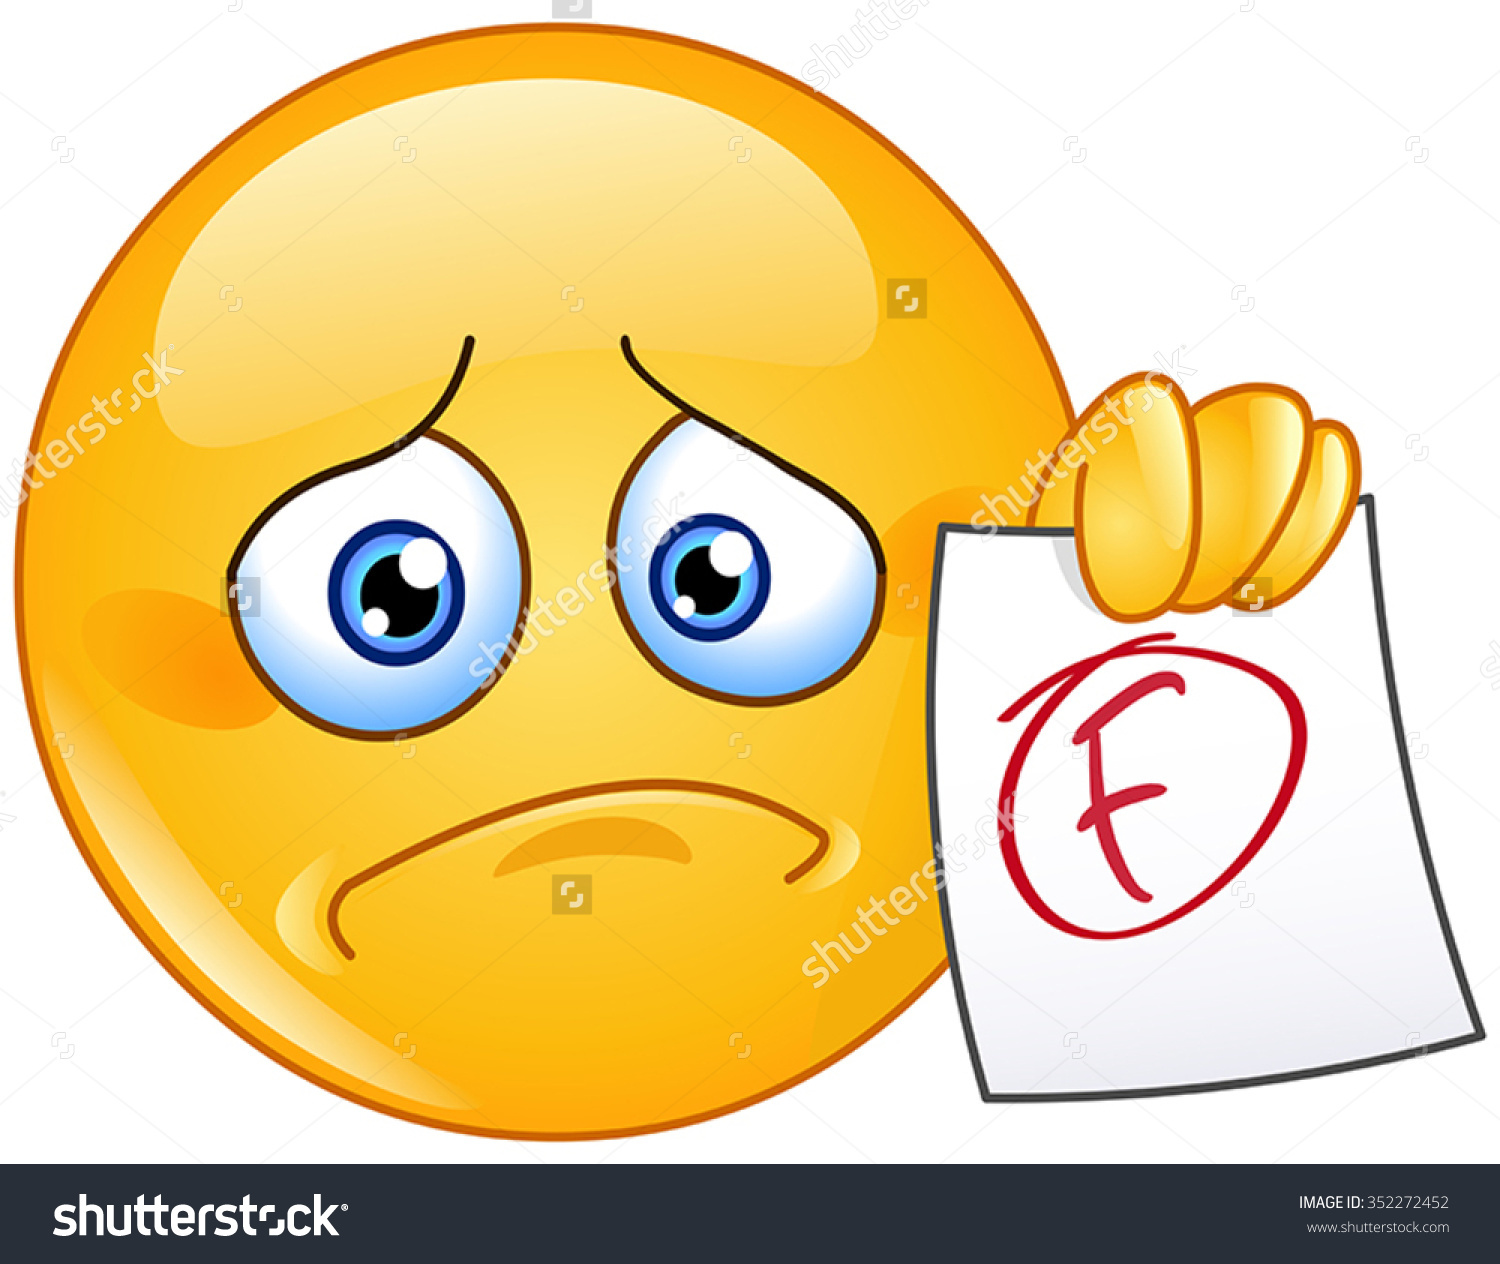 disappointment-clipart-stock-vector-disappointed-yellow-ball-showing-a-paper-with-f-failure-grade-352272452